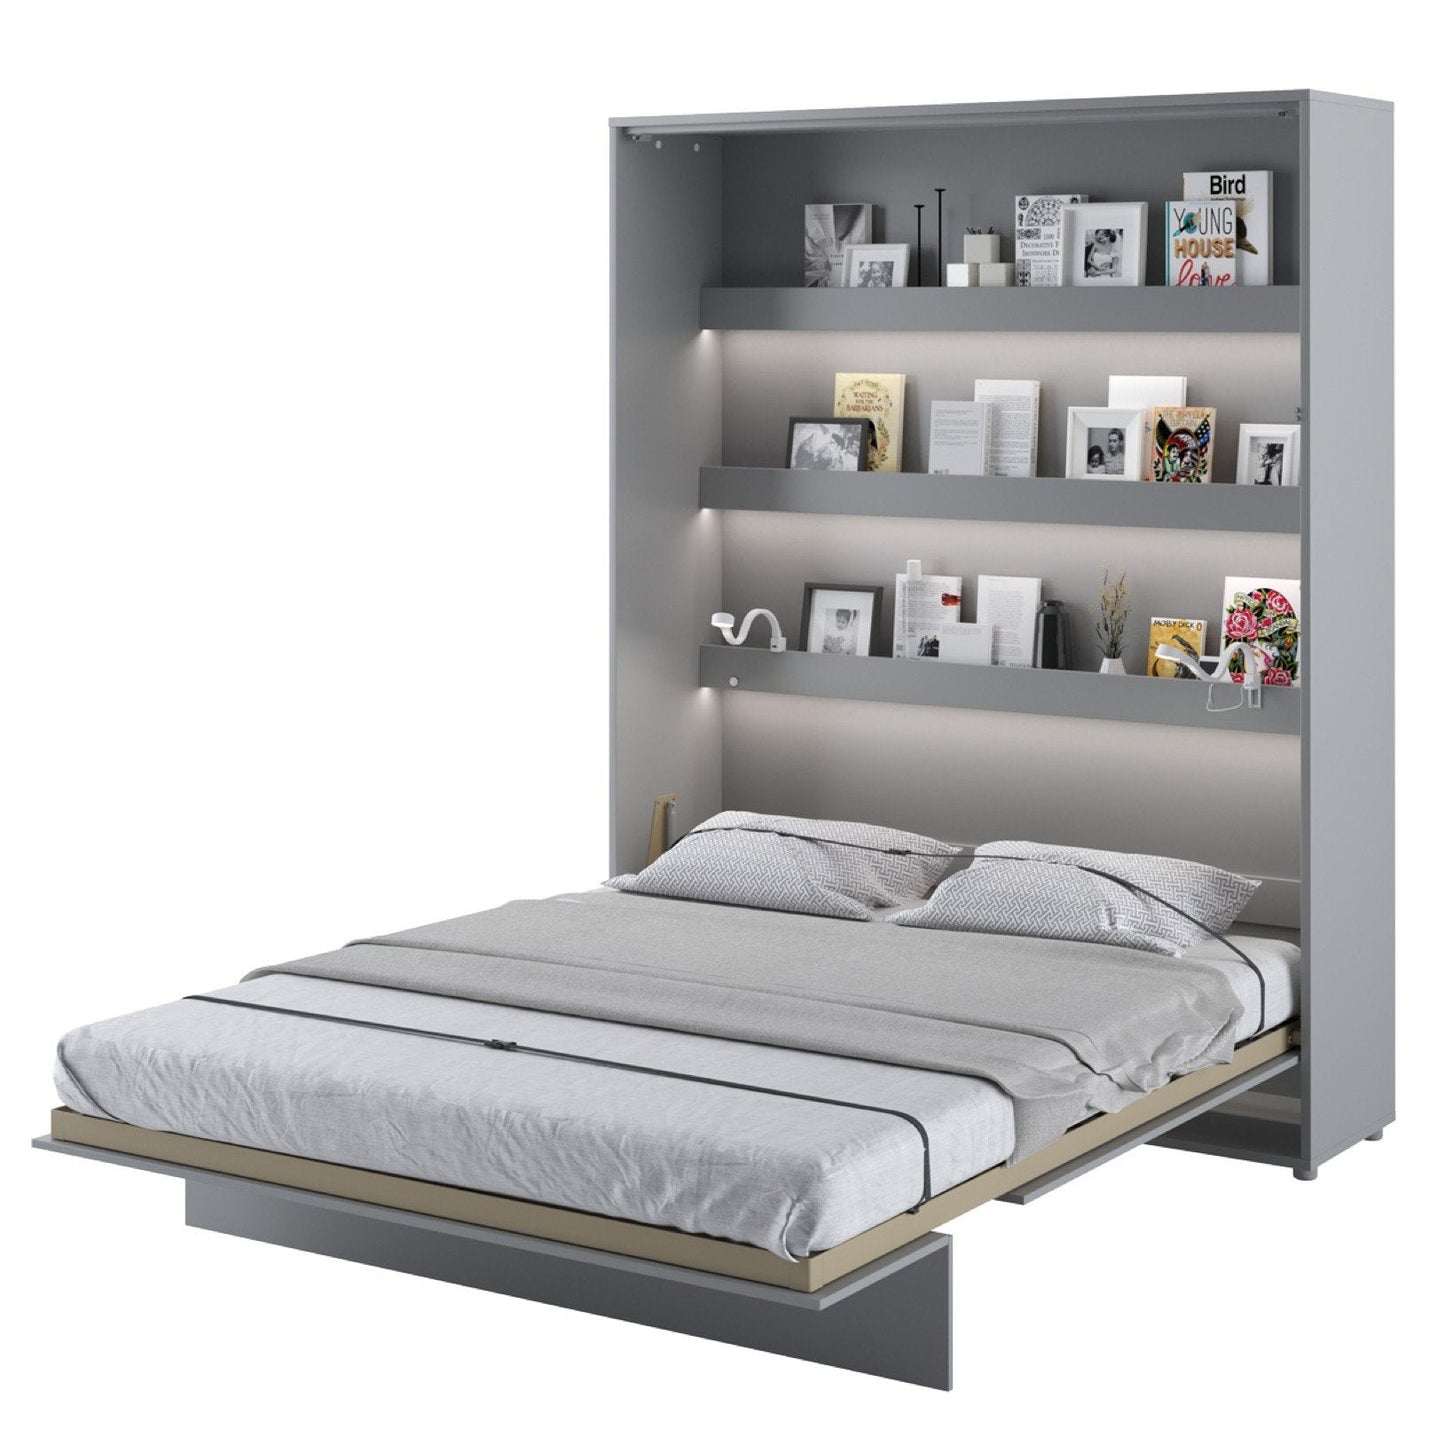 BC-13 Vertical Wall Bed Concept 180cm - Furniture Gold